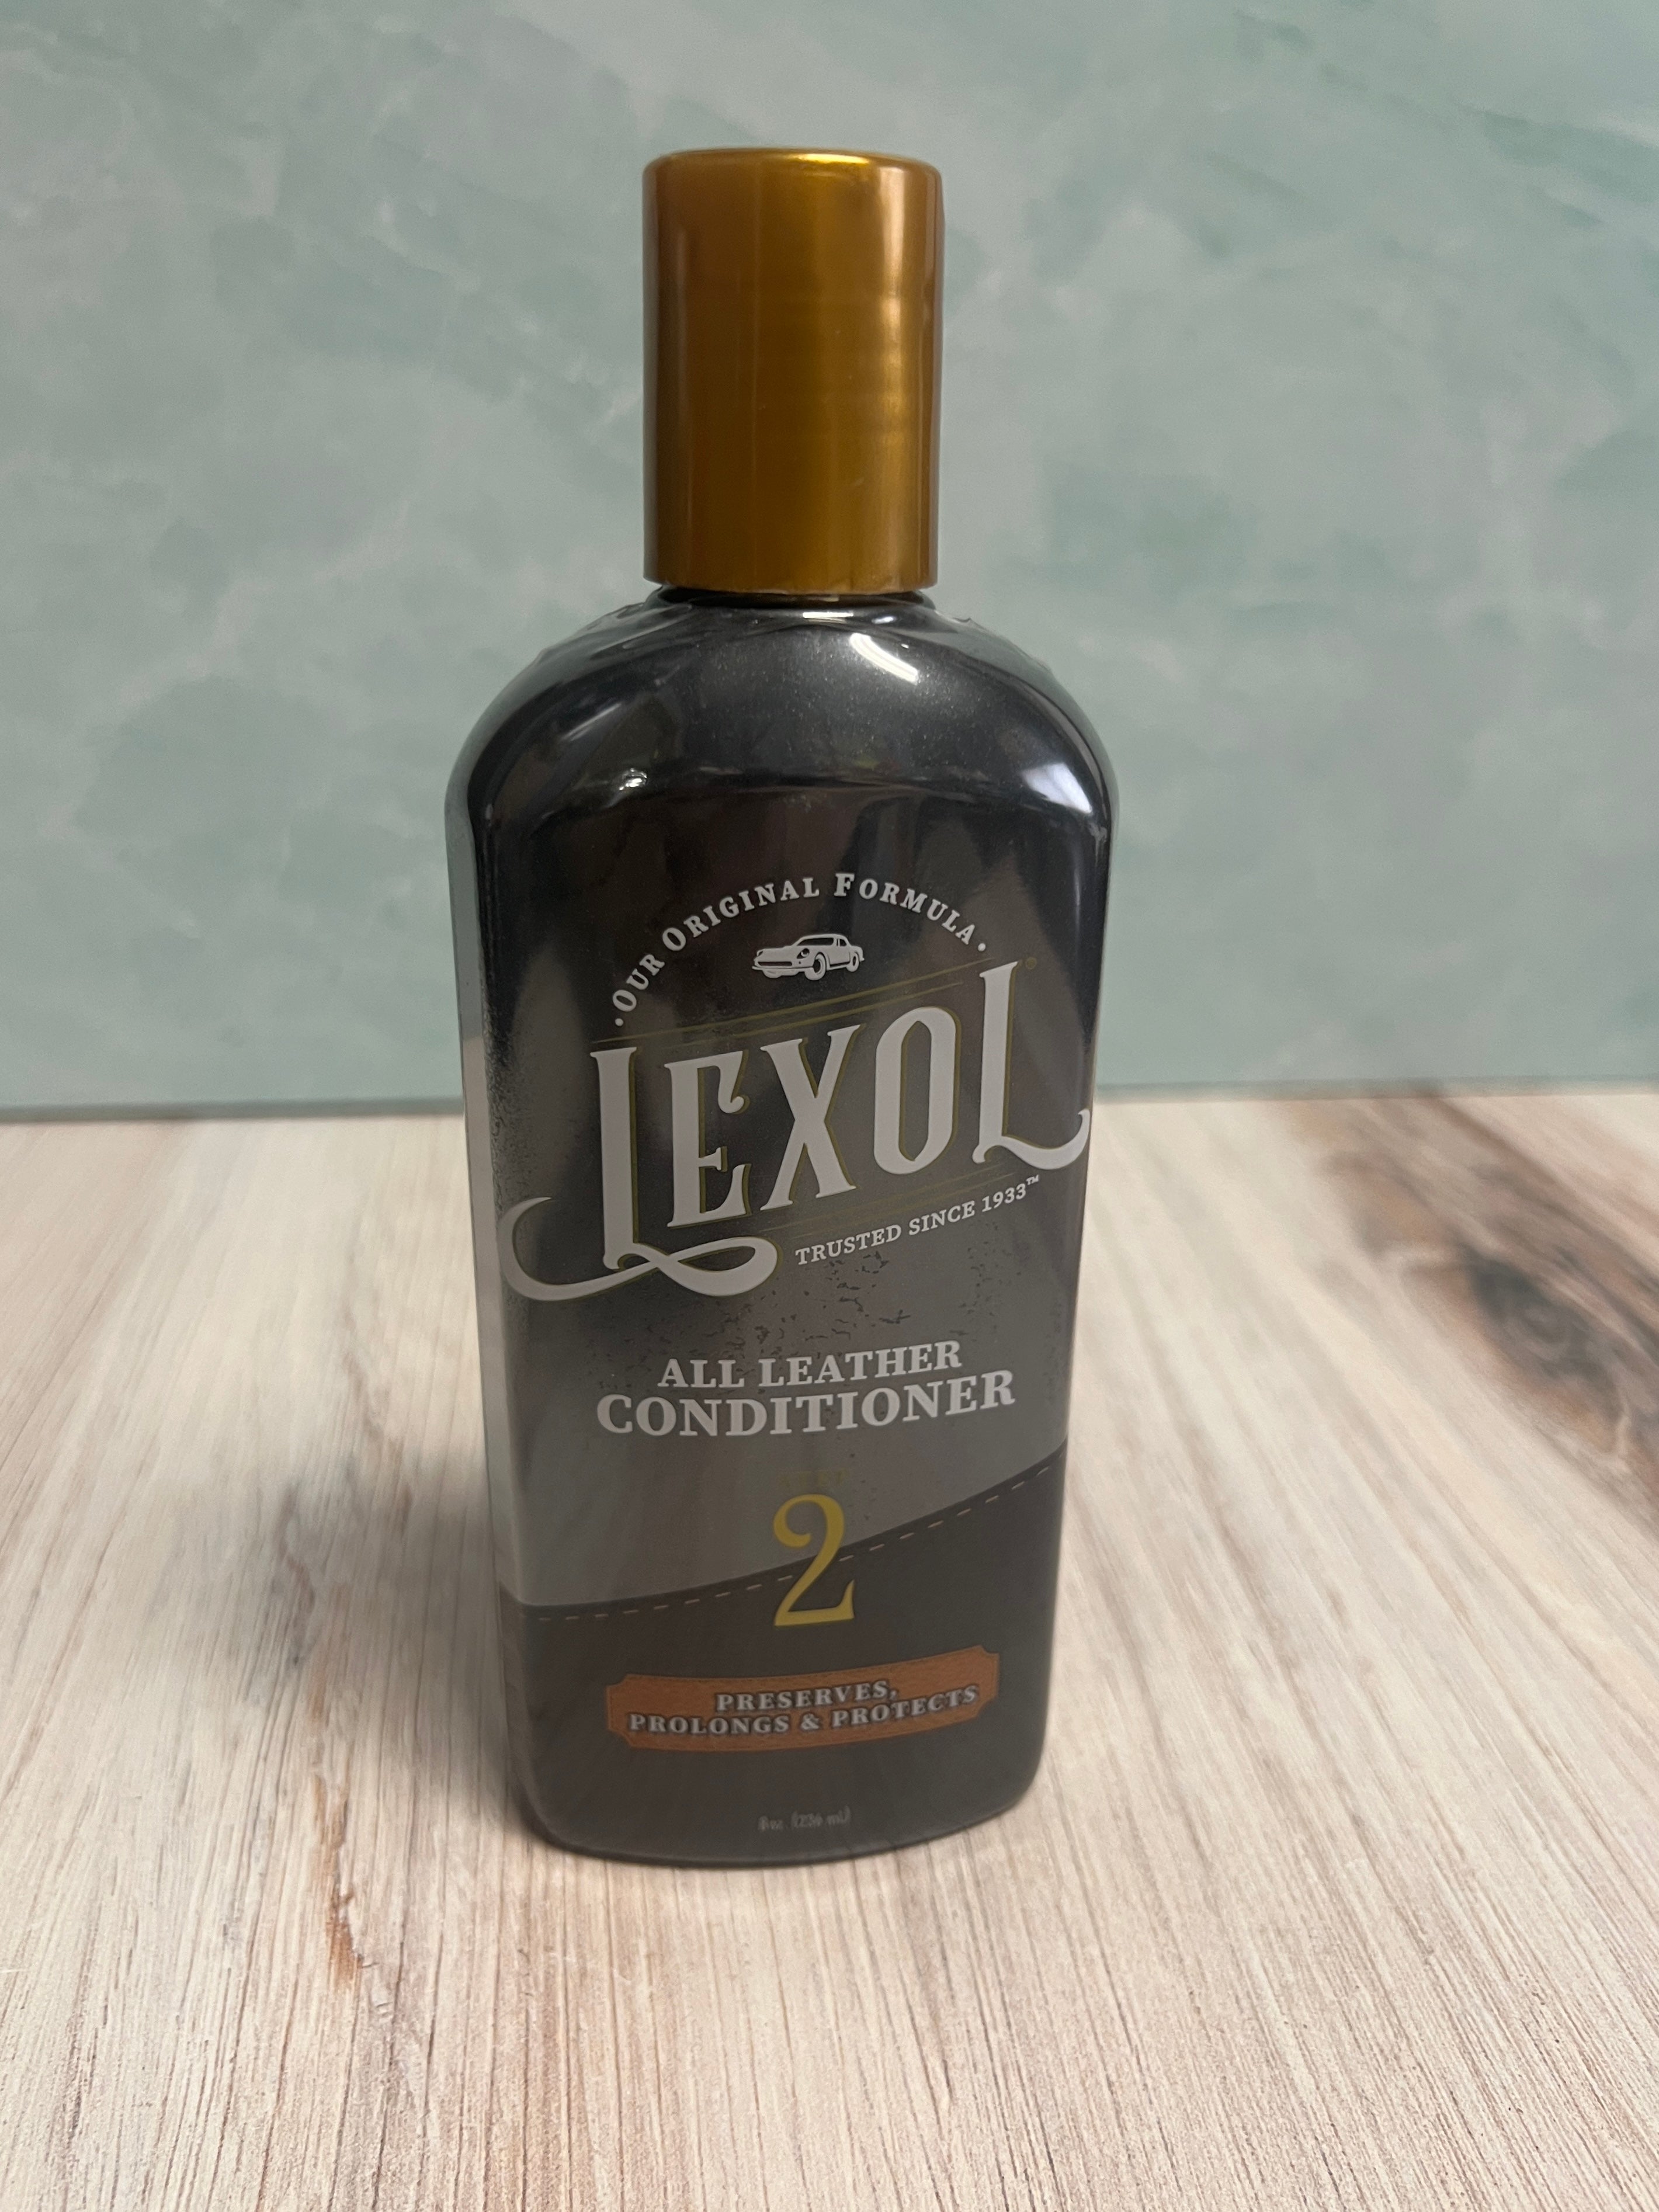 Lexol All Leather Conditioner